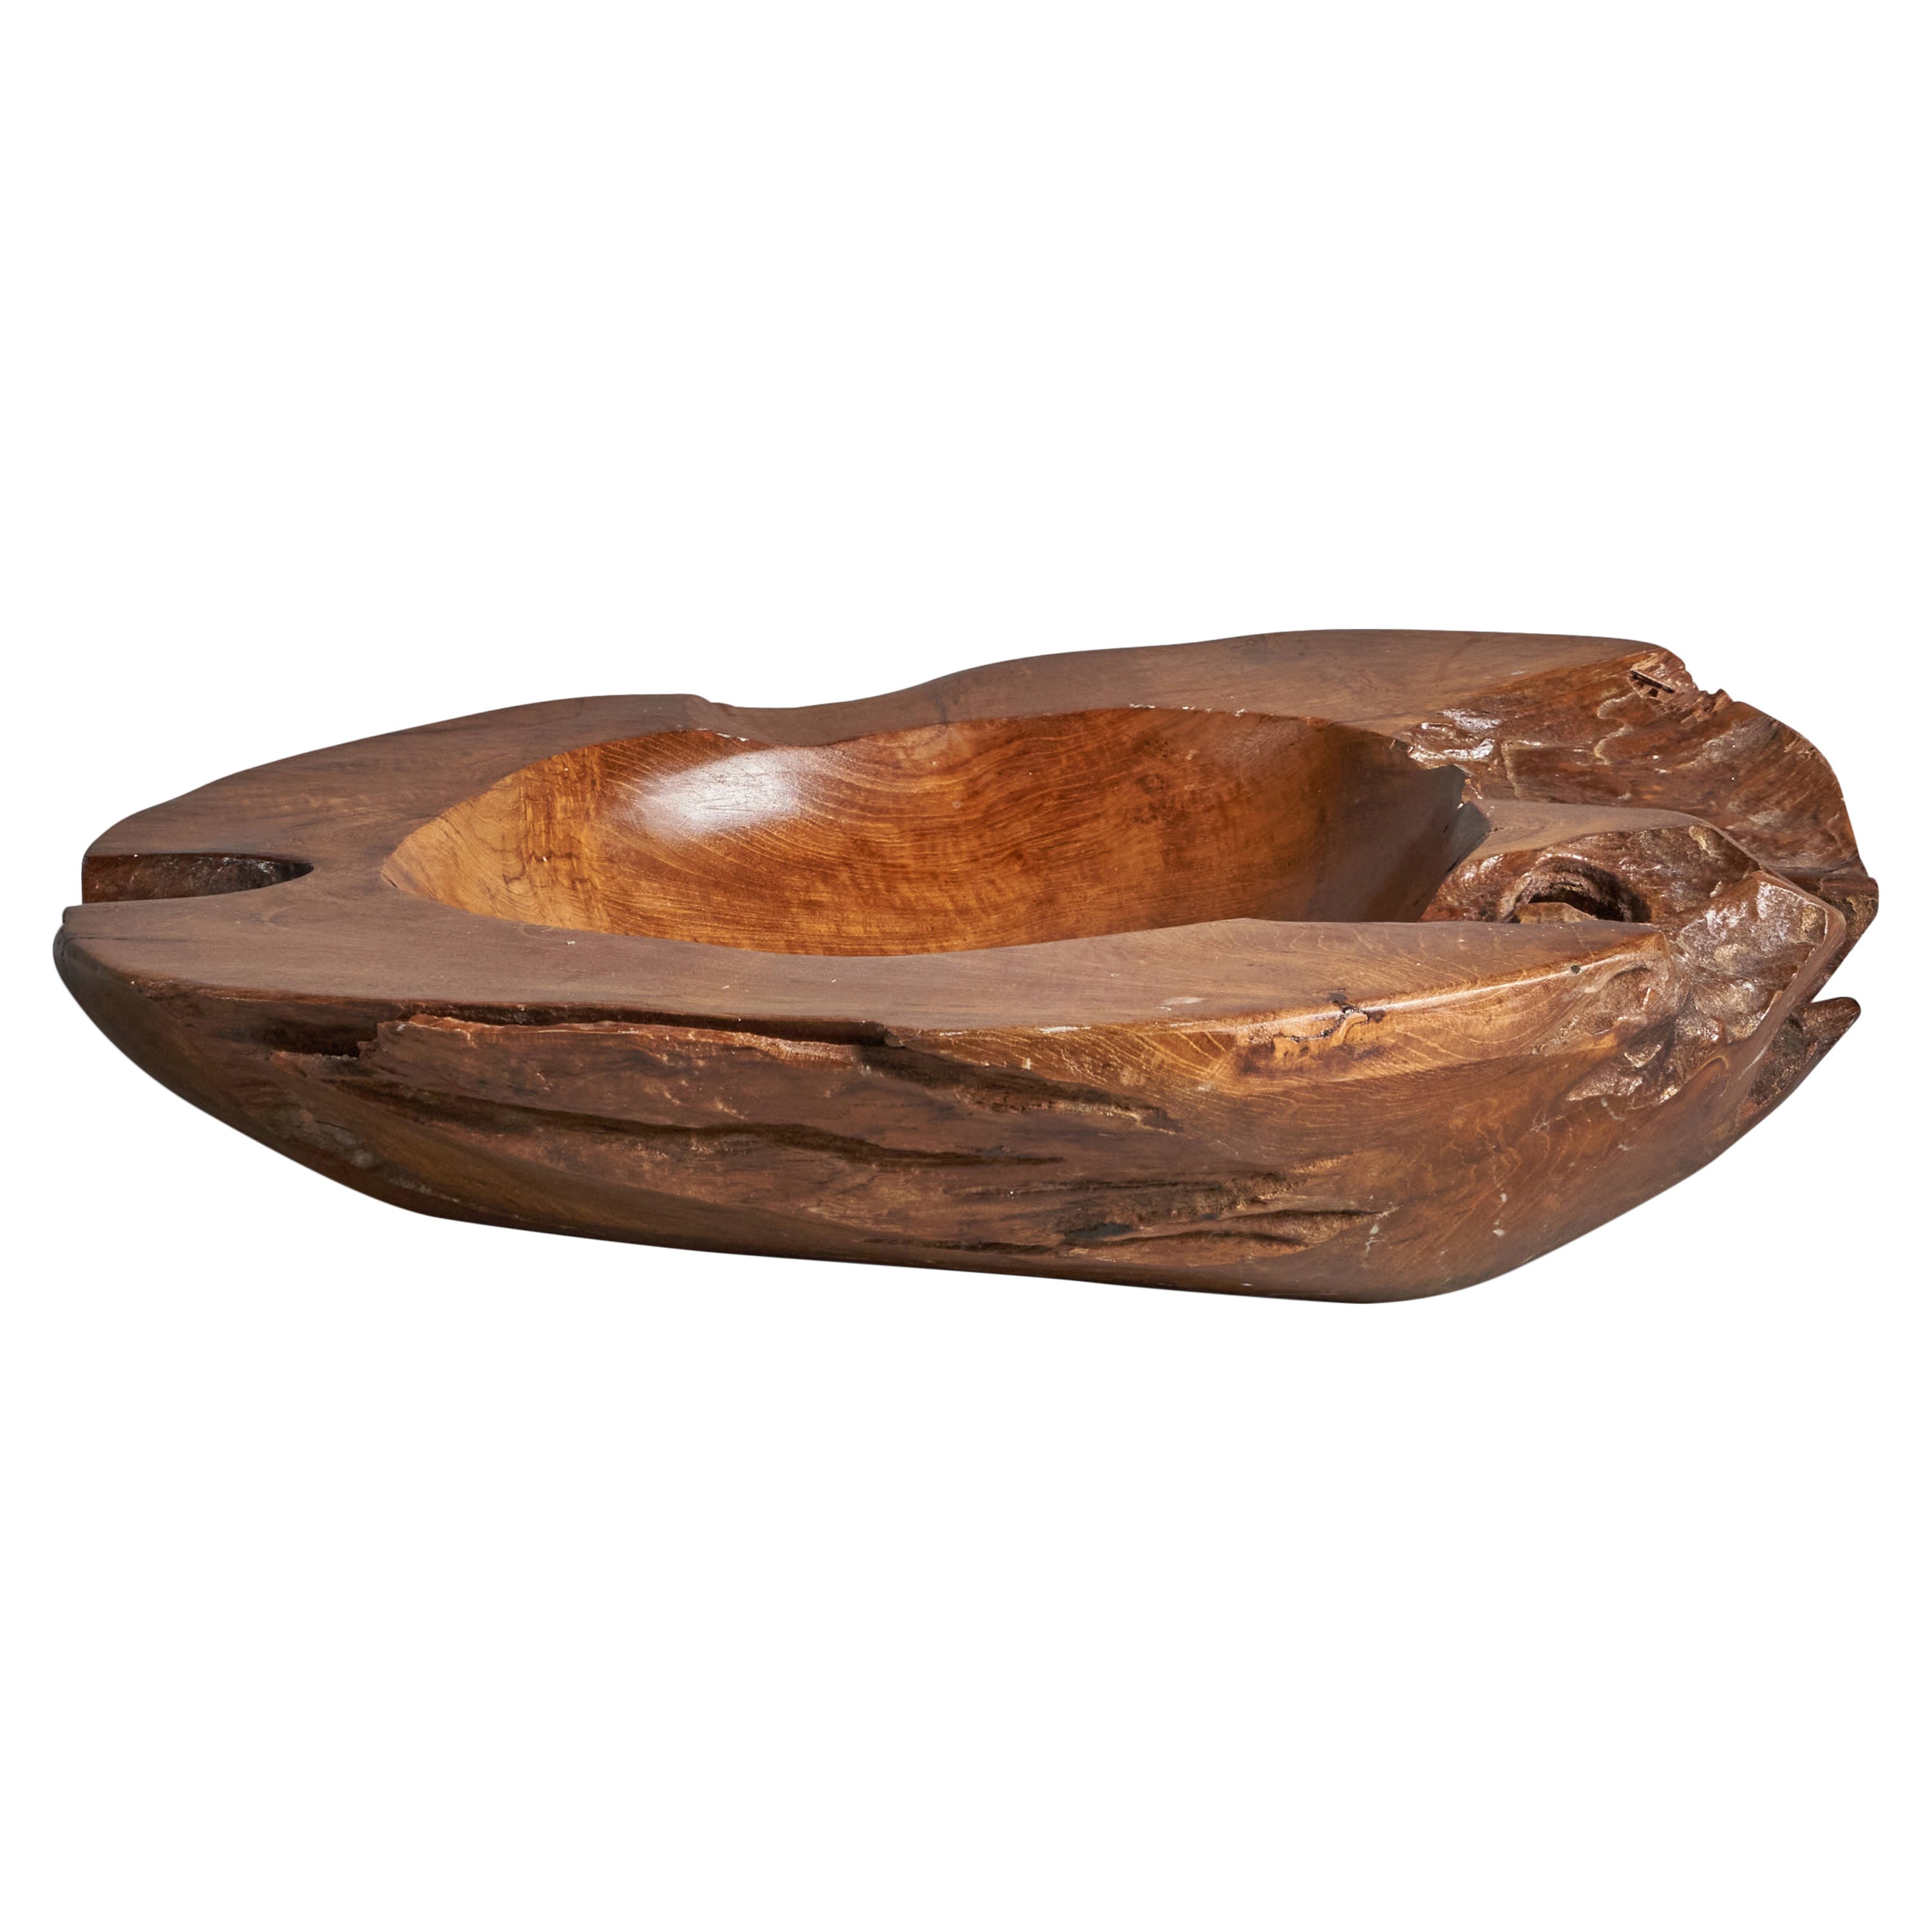 American Craft, Sizeable Freeform Bowl, Walnut, USA, 1960s For Sale